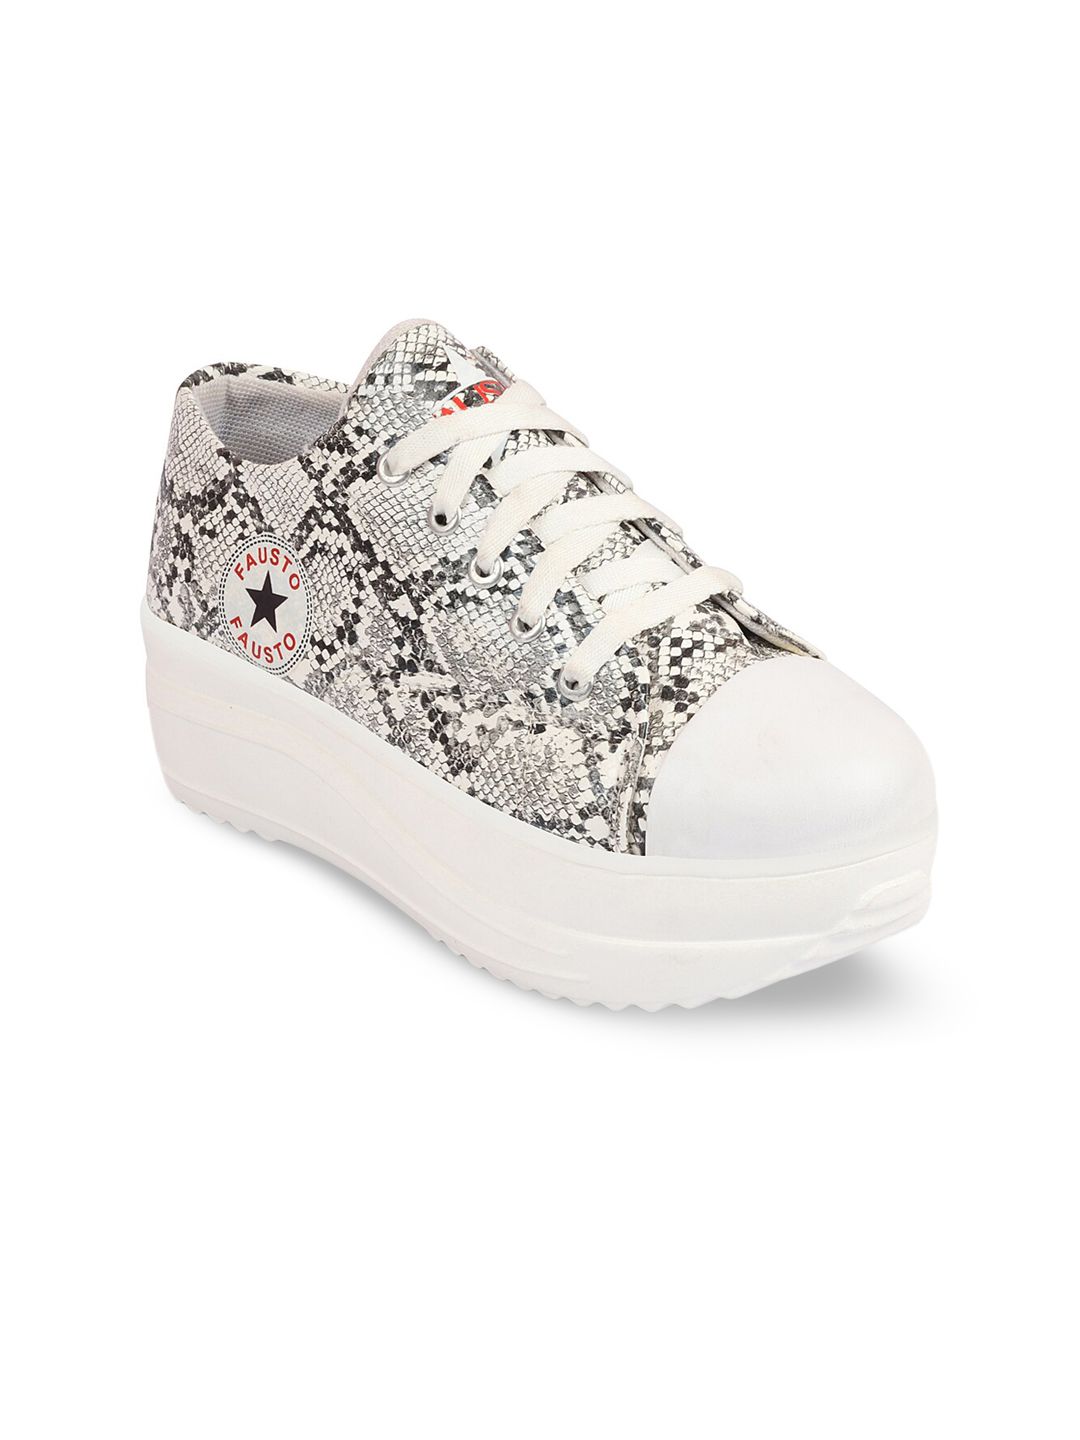 FAUSTO Women Printed Lightweight Canvas Sneakers Price in India